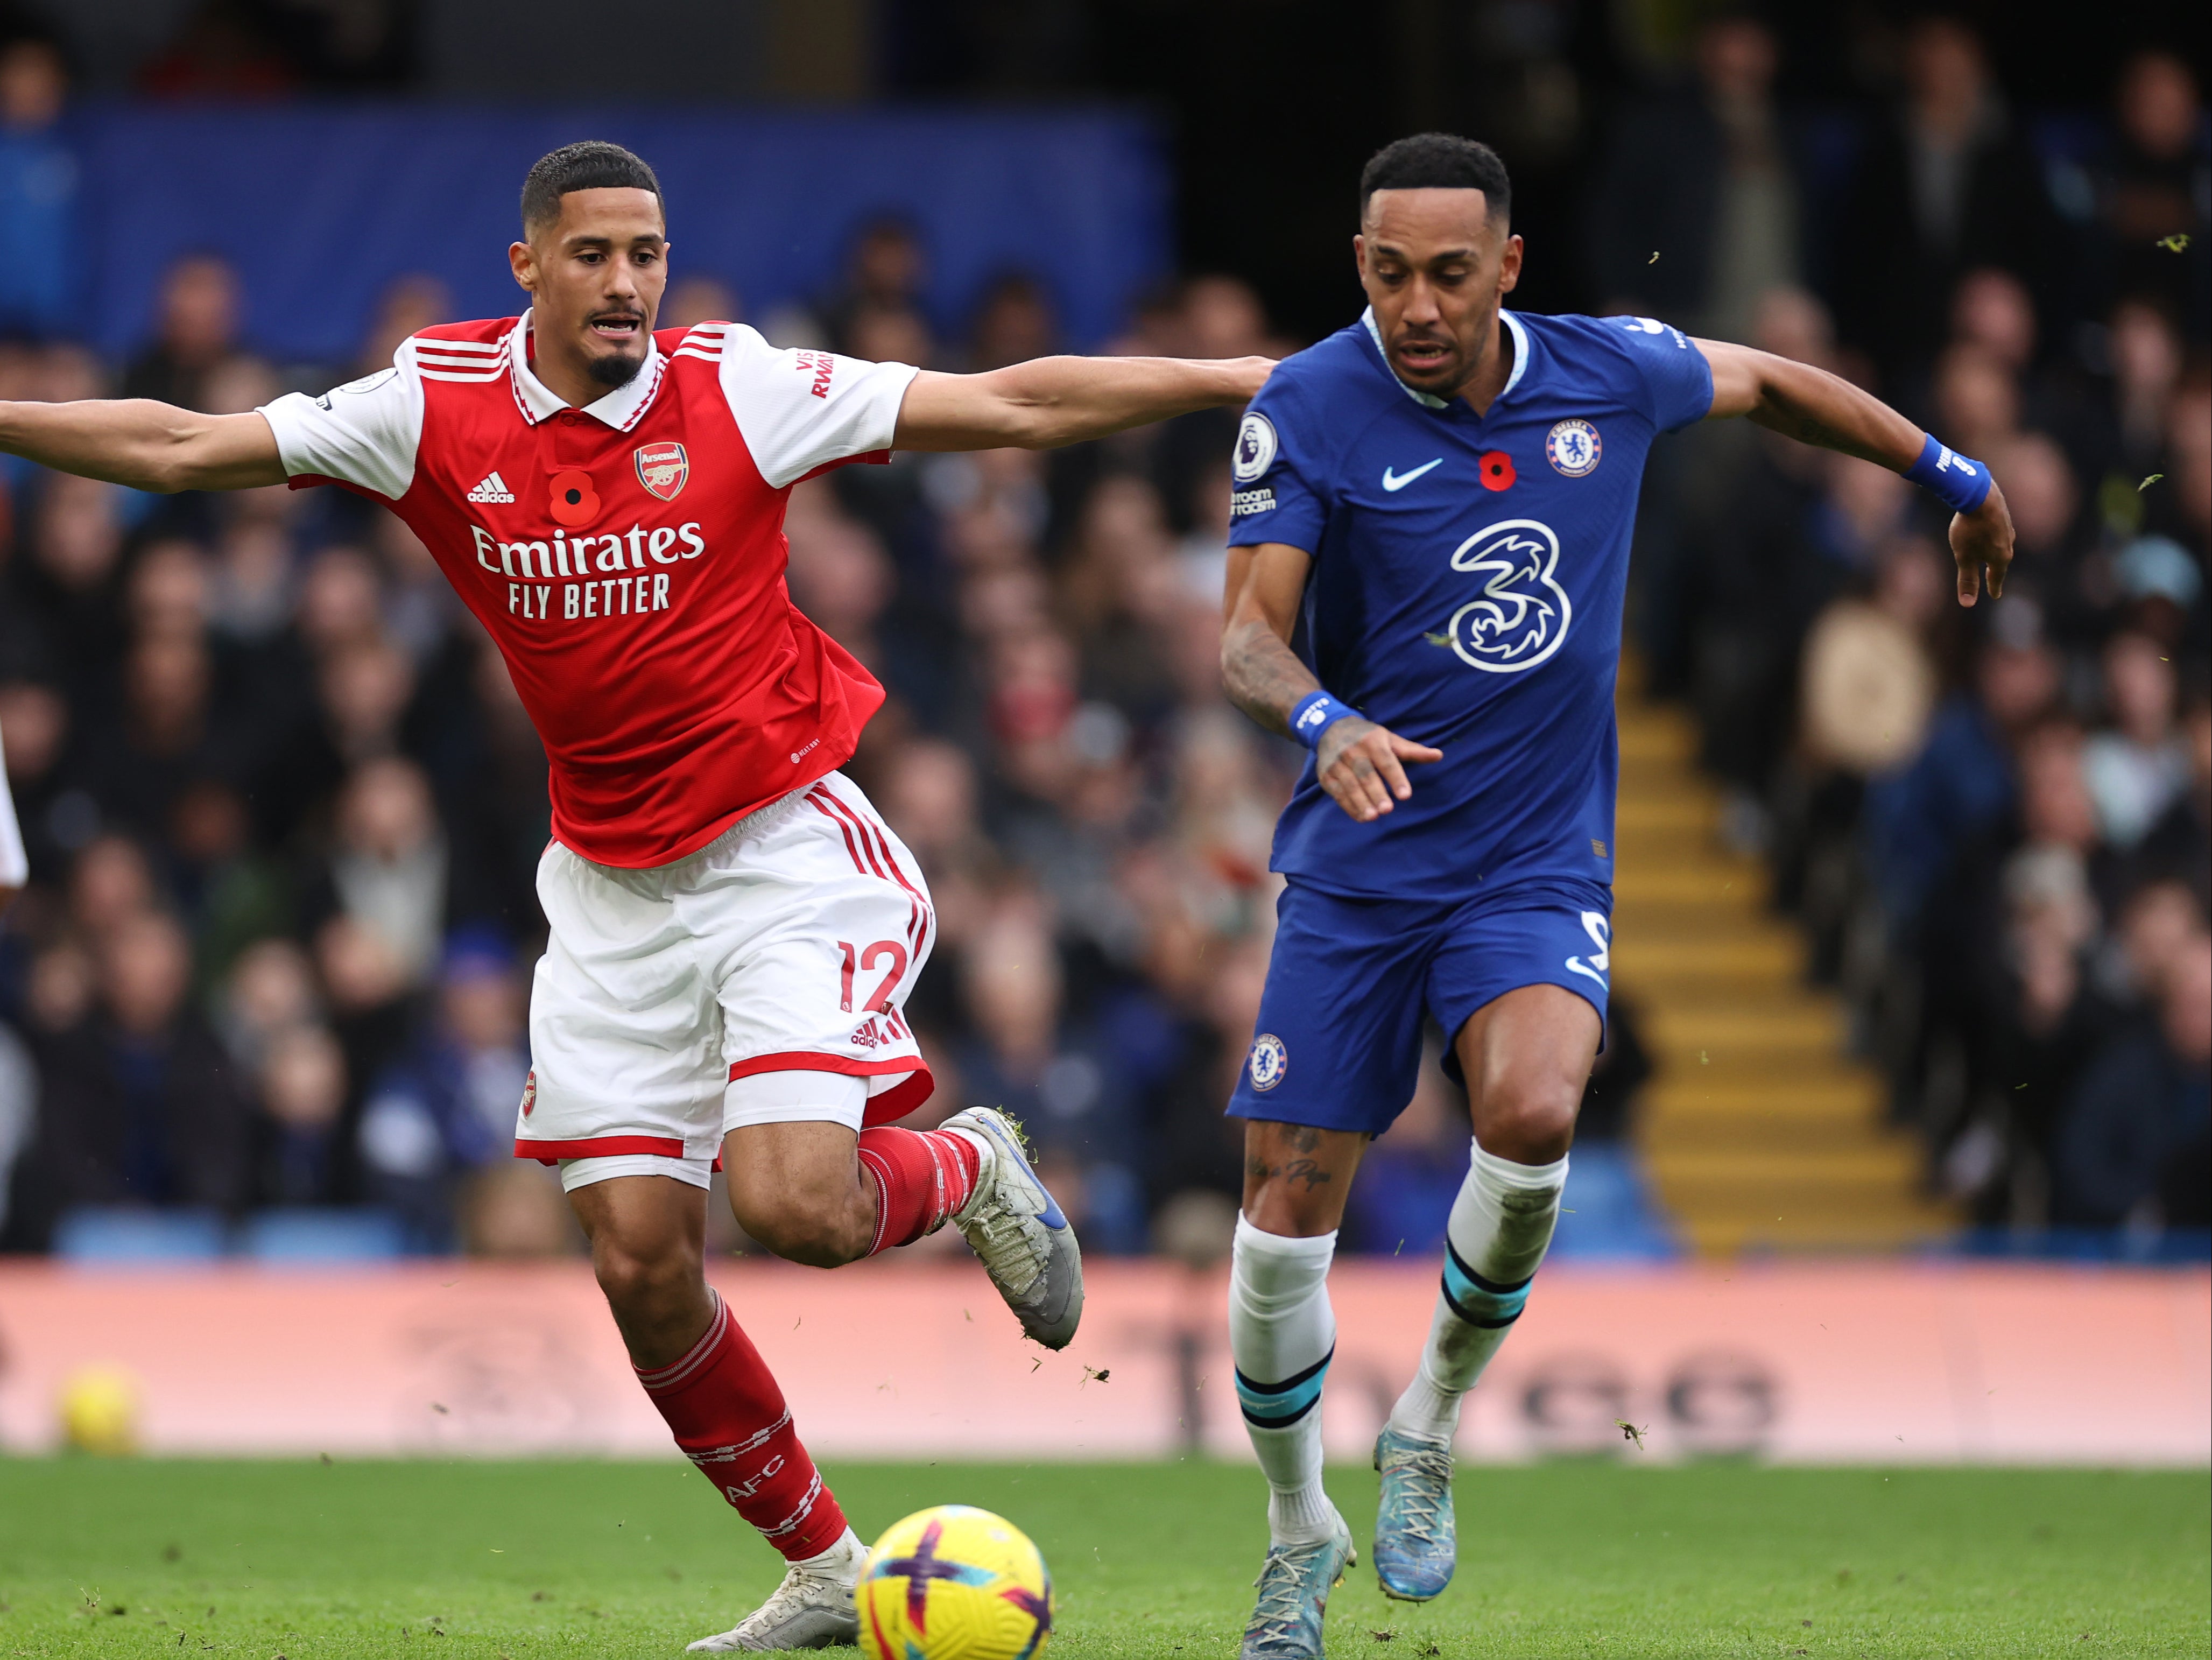 William Saliba and his fellow Arsenal defenders did not have to exert themselves to keep Pierre-Emerick Aubameyang quiet at Stamford Bridge